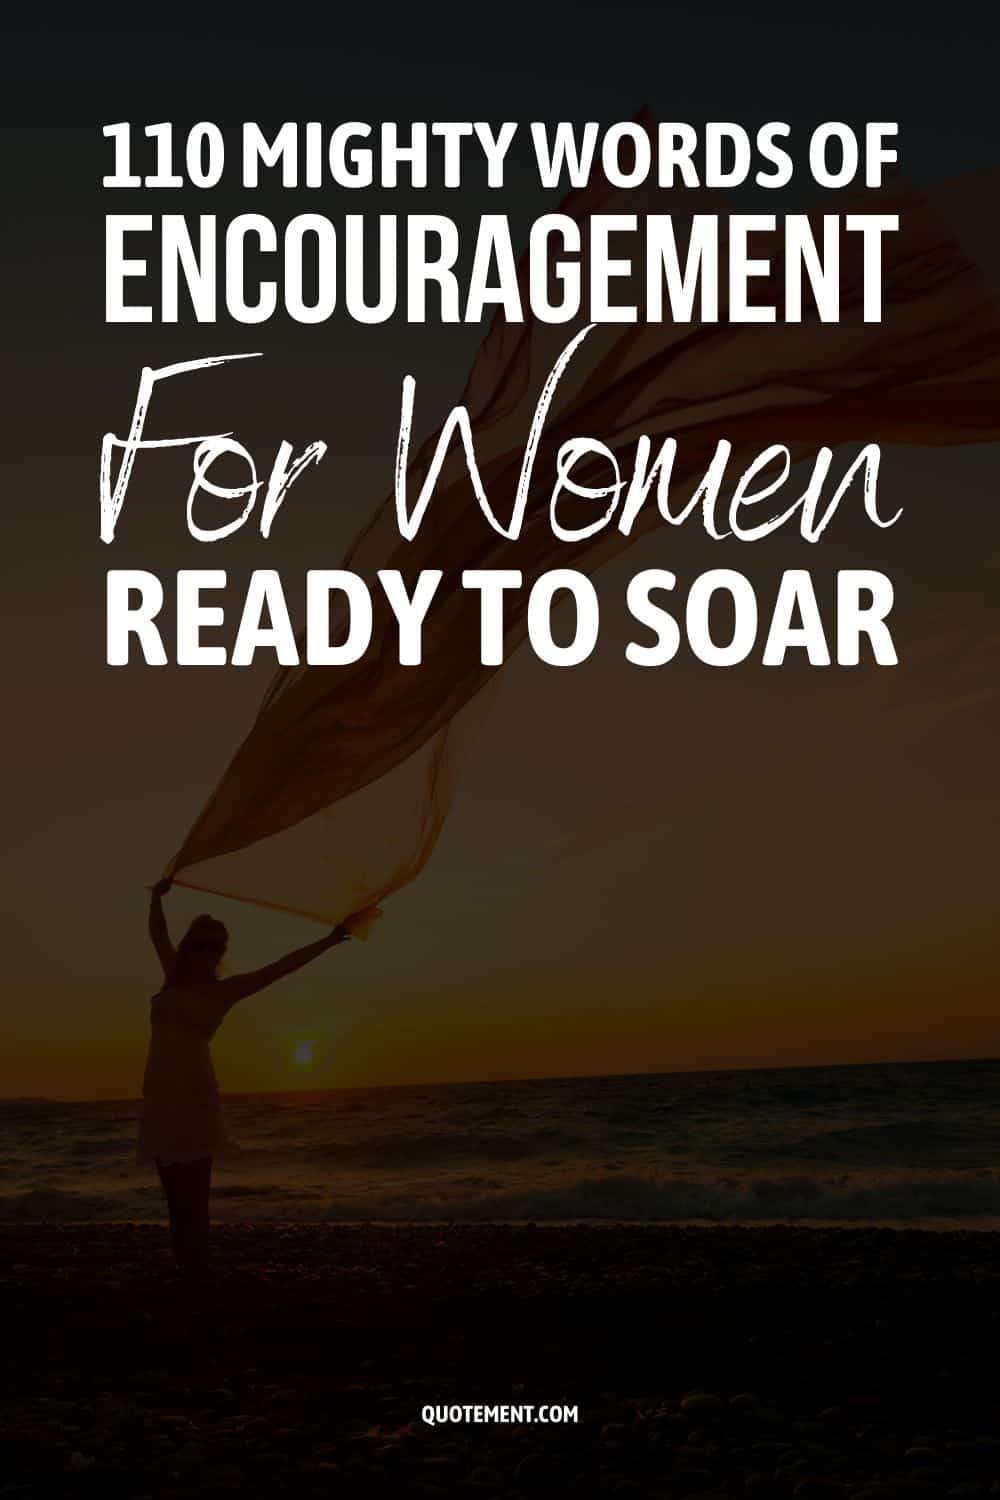 110 Mighty Words Of Encouragement For Women Ready To Soar
